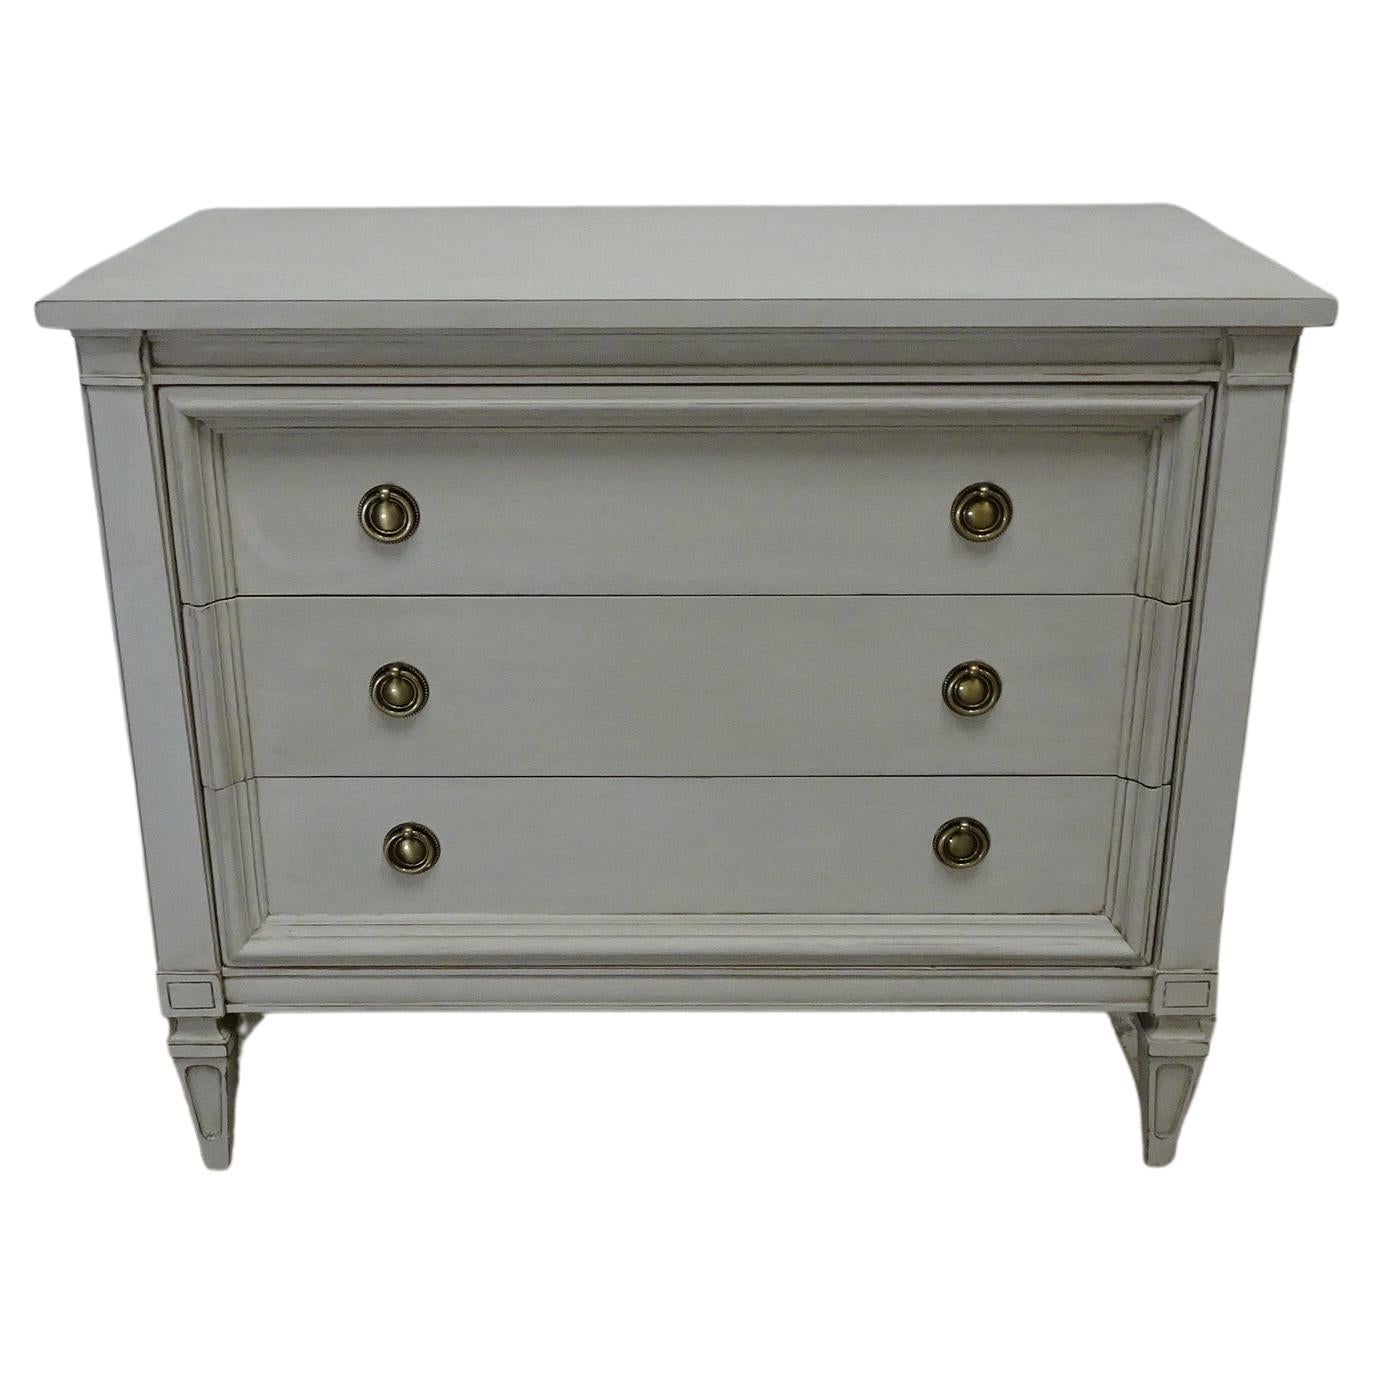 Gustavian Style Unique 3 Drawer Chest of Drawers